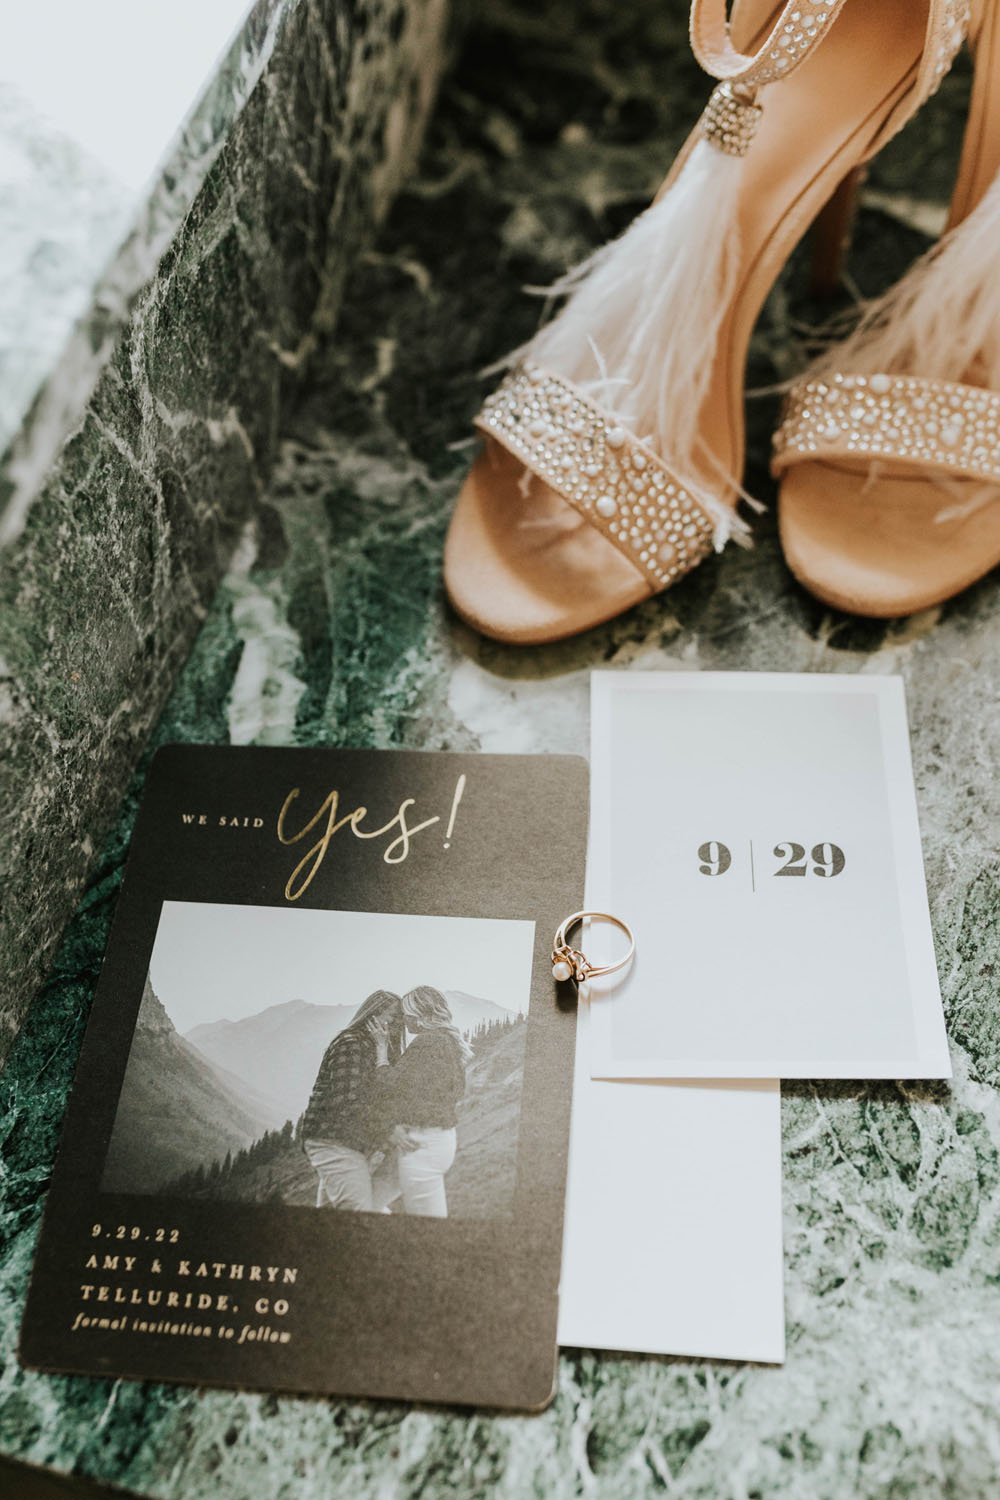  a styled flatlay of wedding invitations for brides kathryn and amy featuring their invitation, save the date, wedding shoes, and wedding rings 